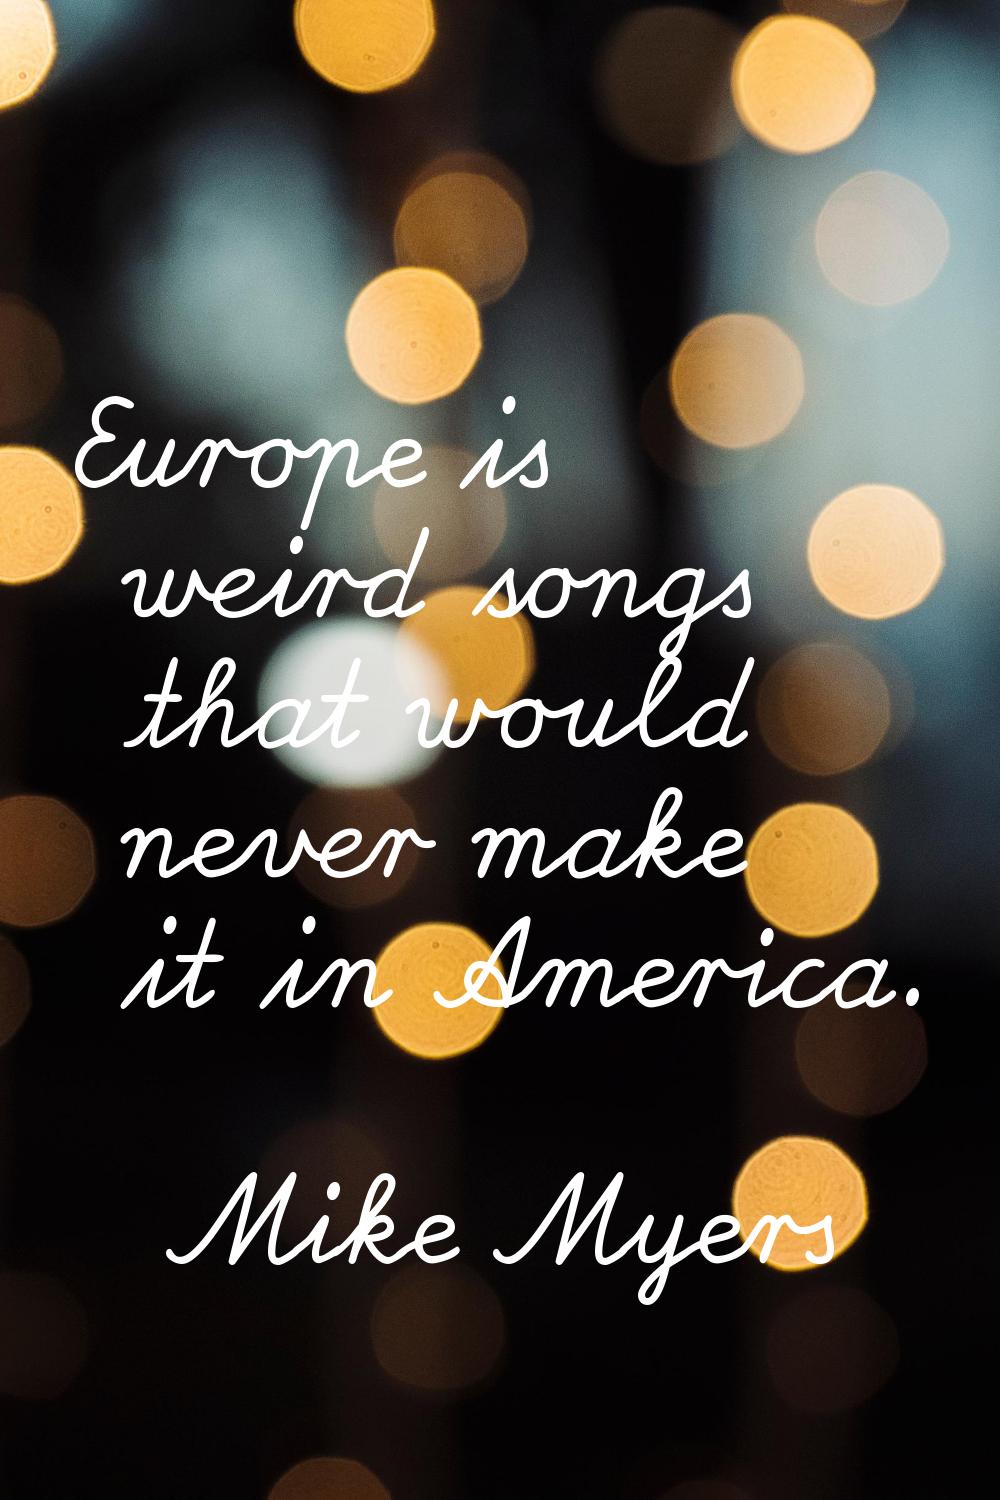 Europe is weird songs that would never make it in America.